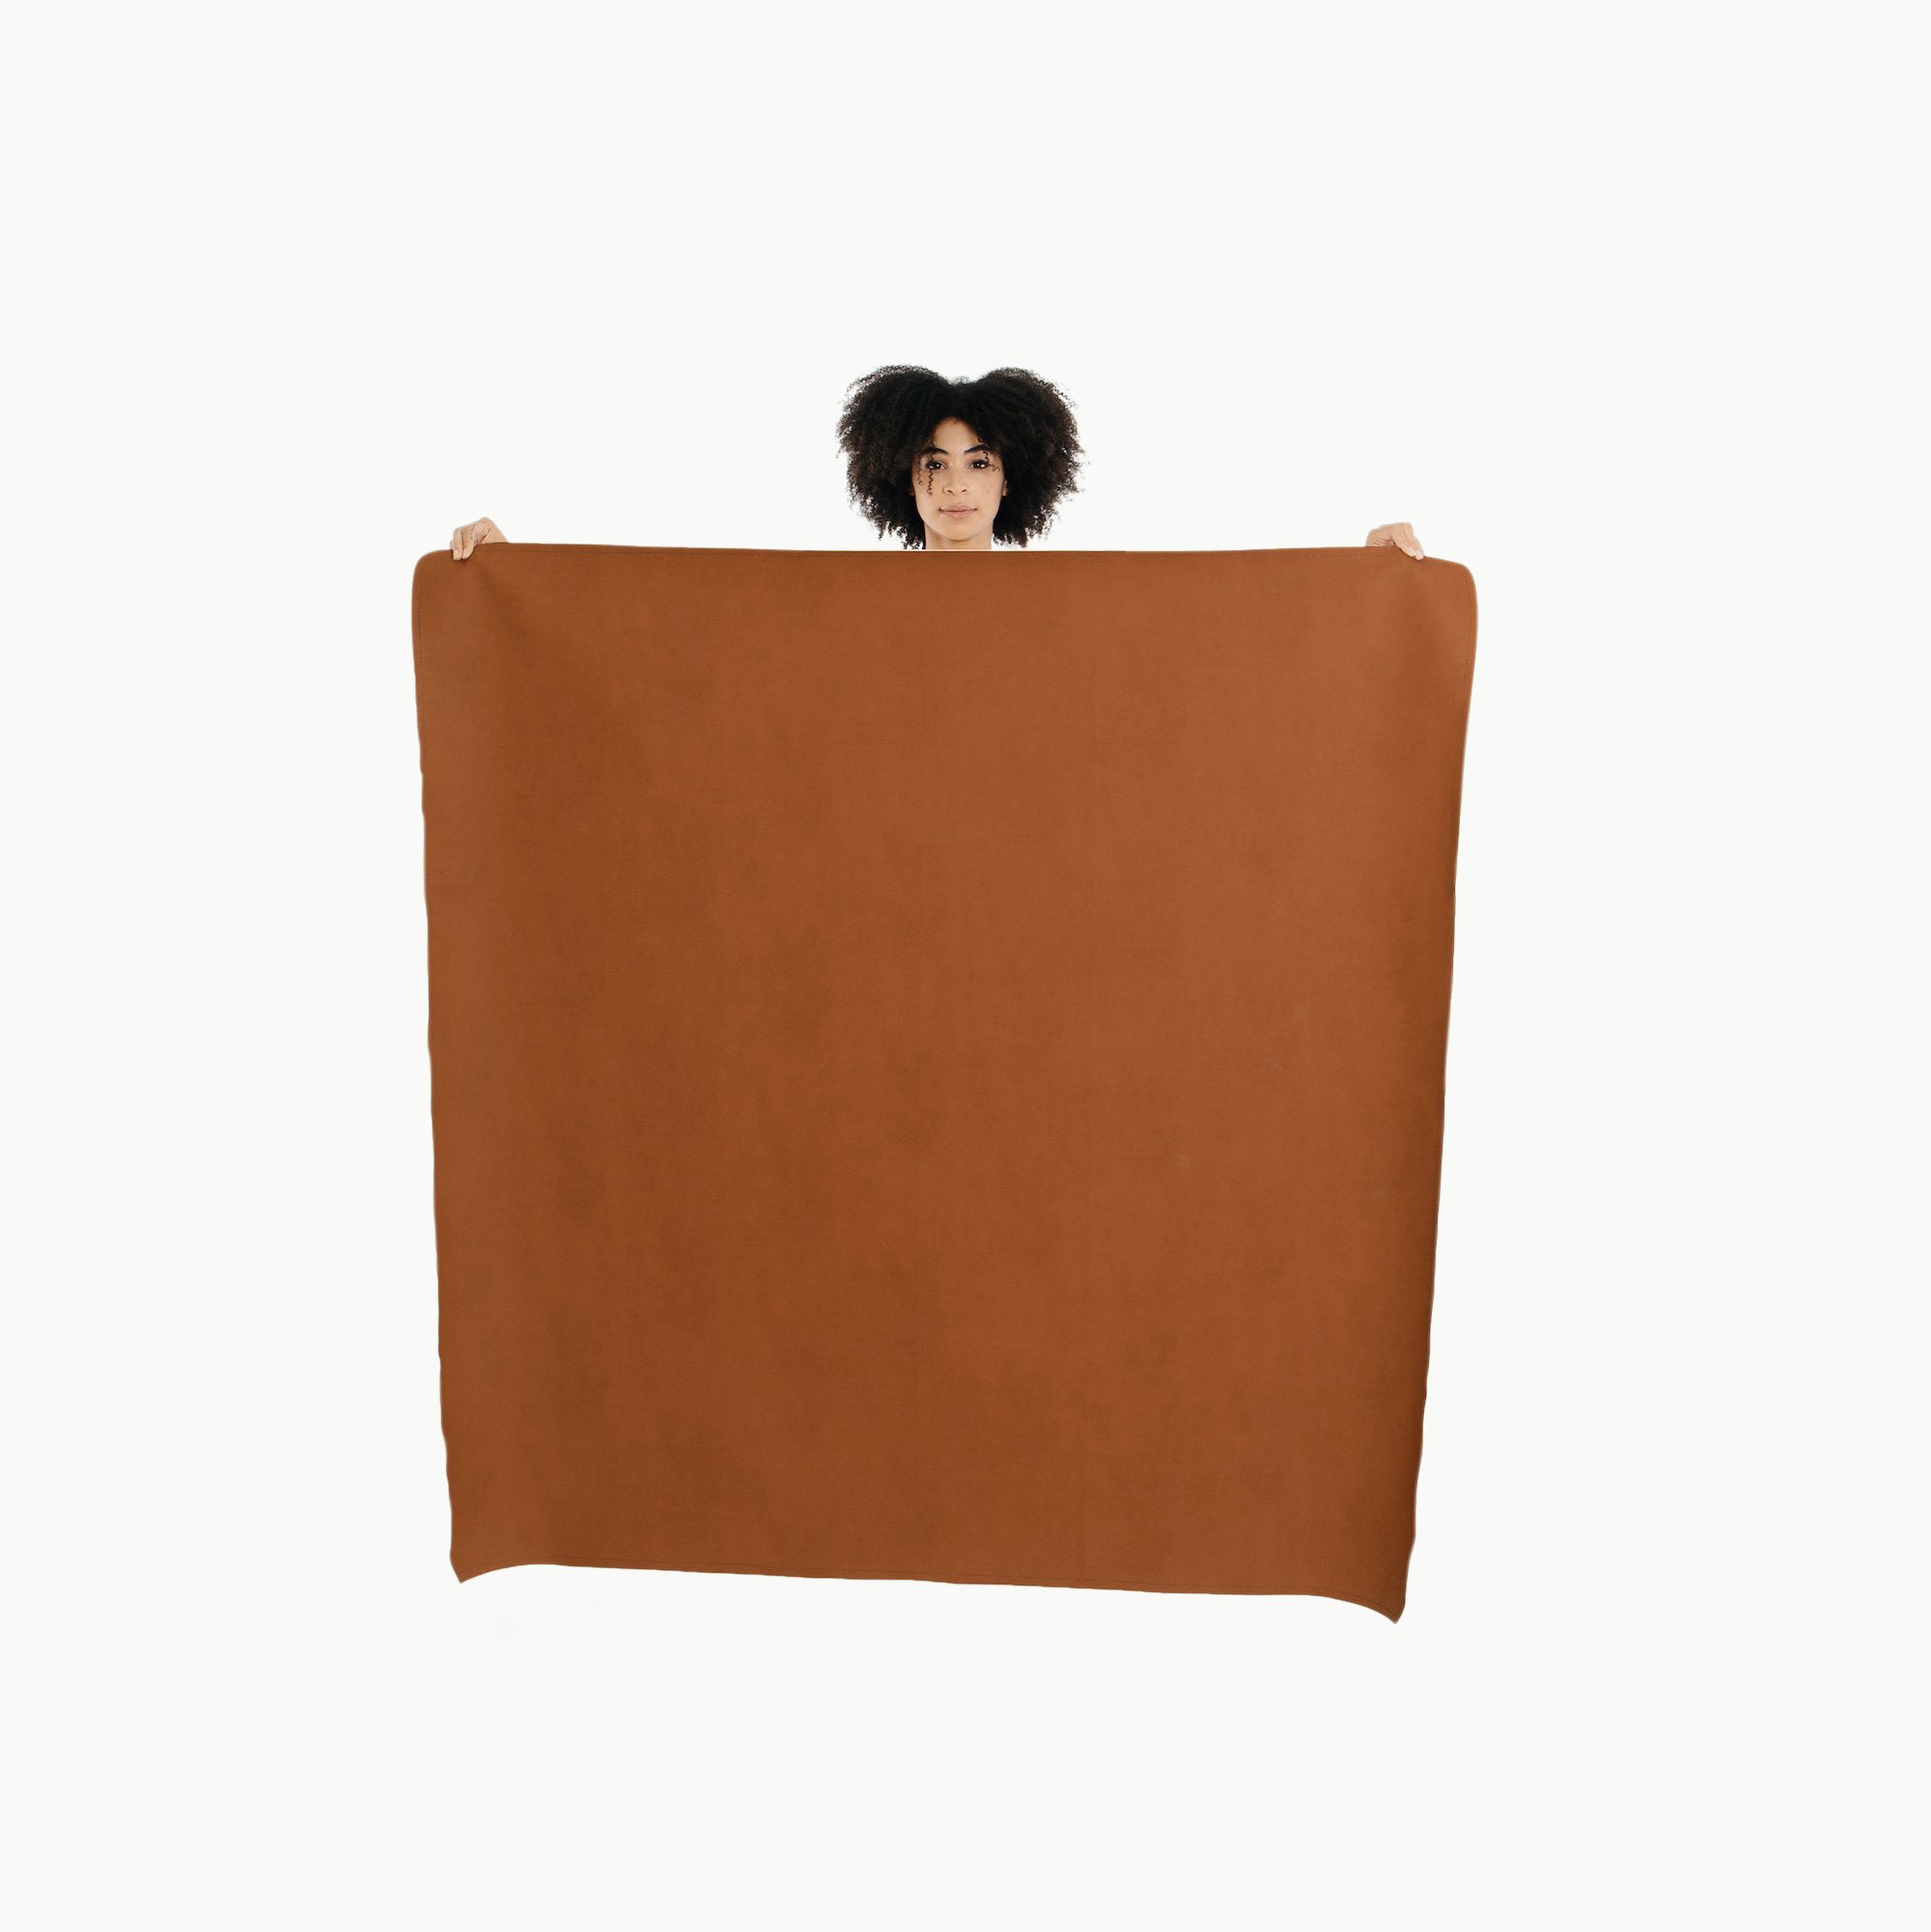 Ginger (on sale) / Square@woman holding the ginger midi square mat